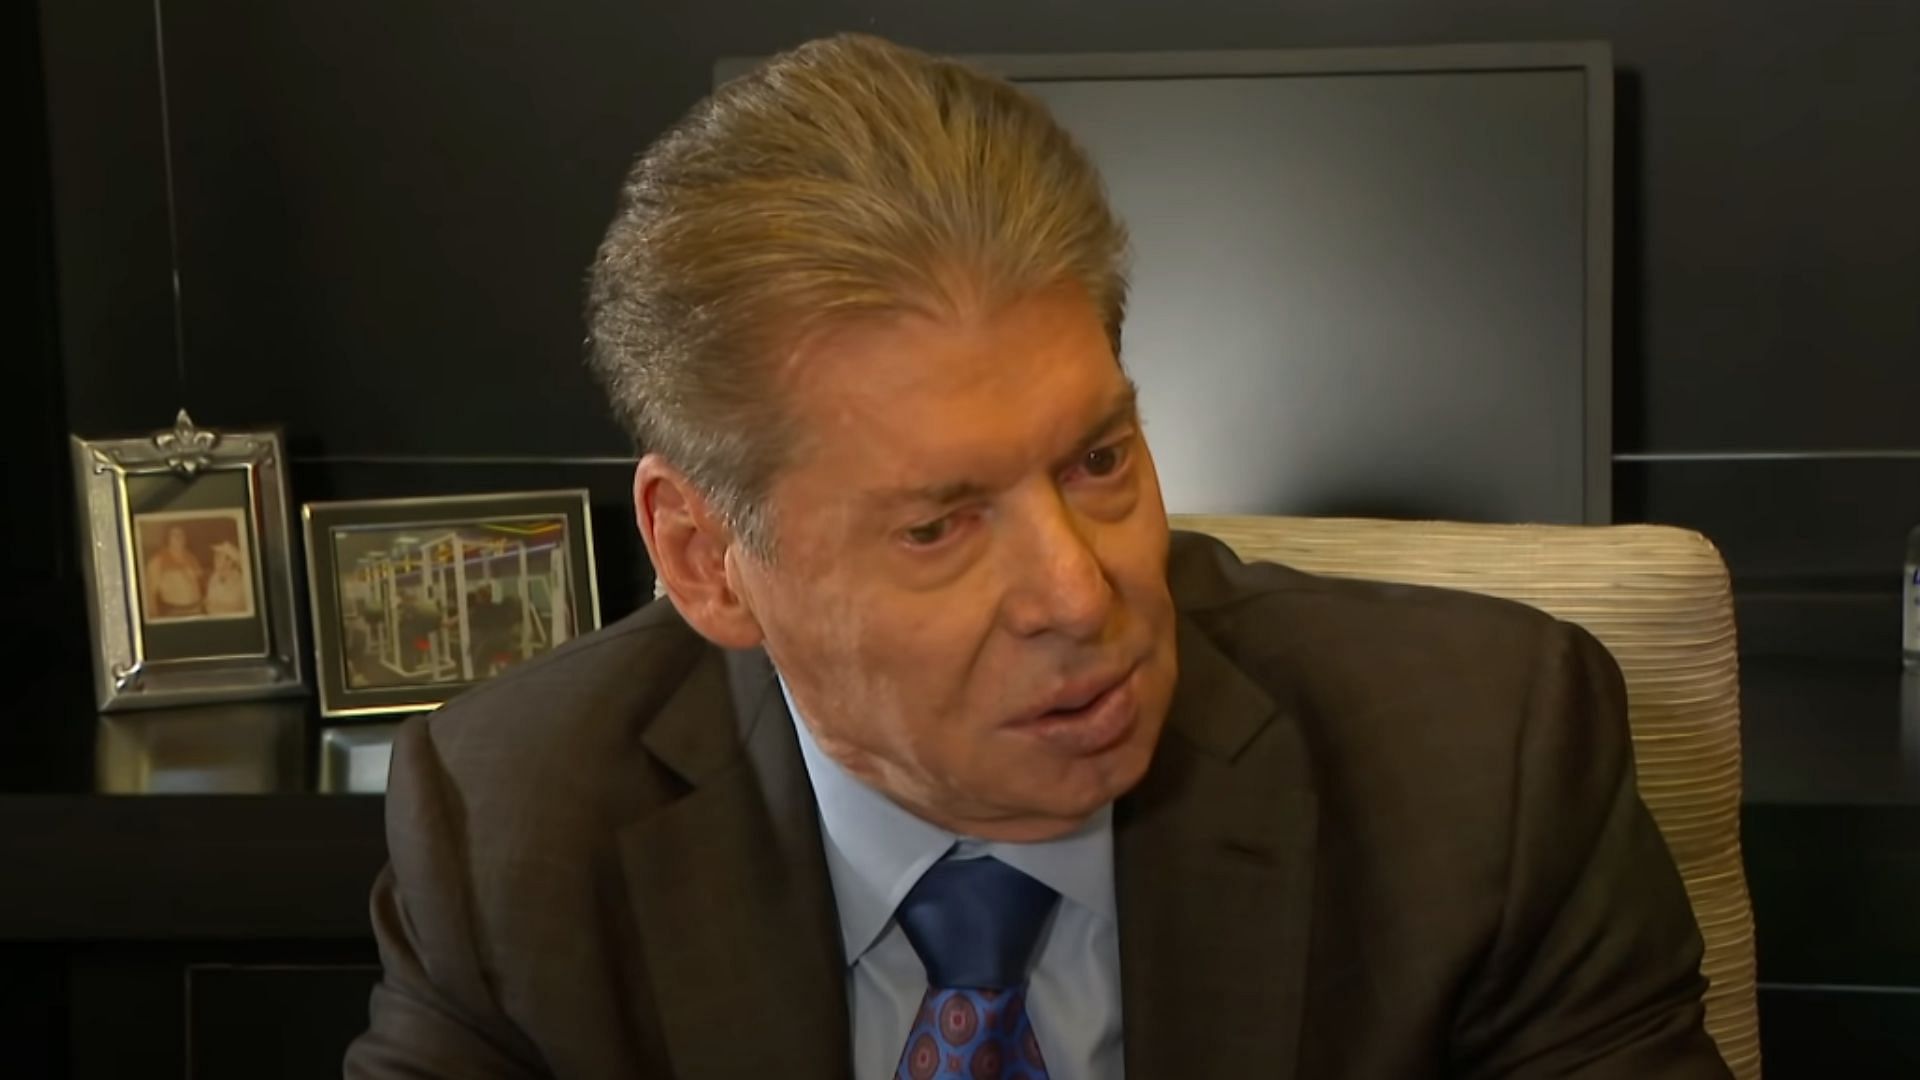 Vince McMahon recently announced his retirement.